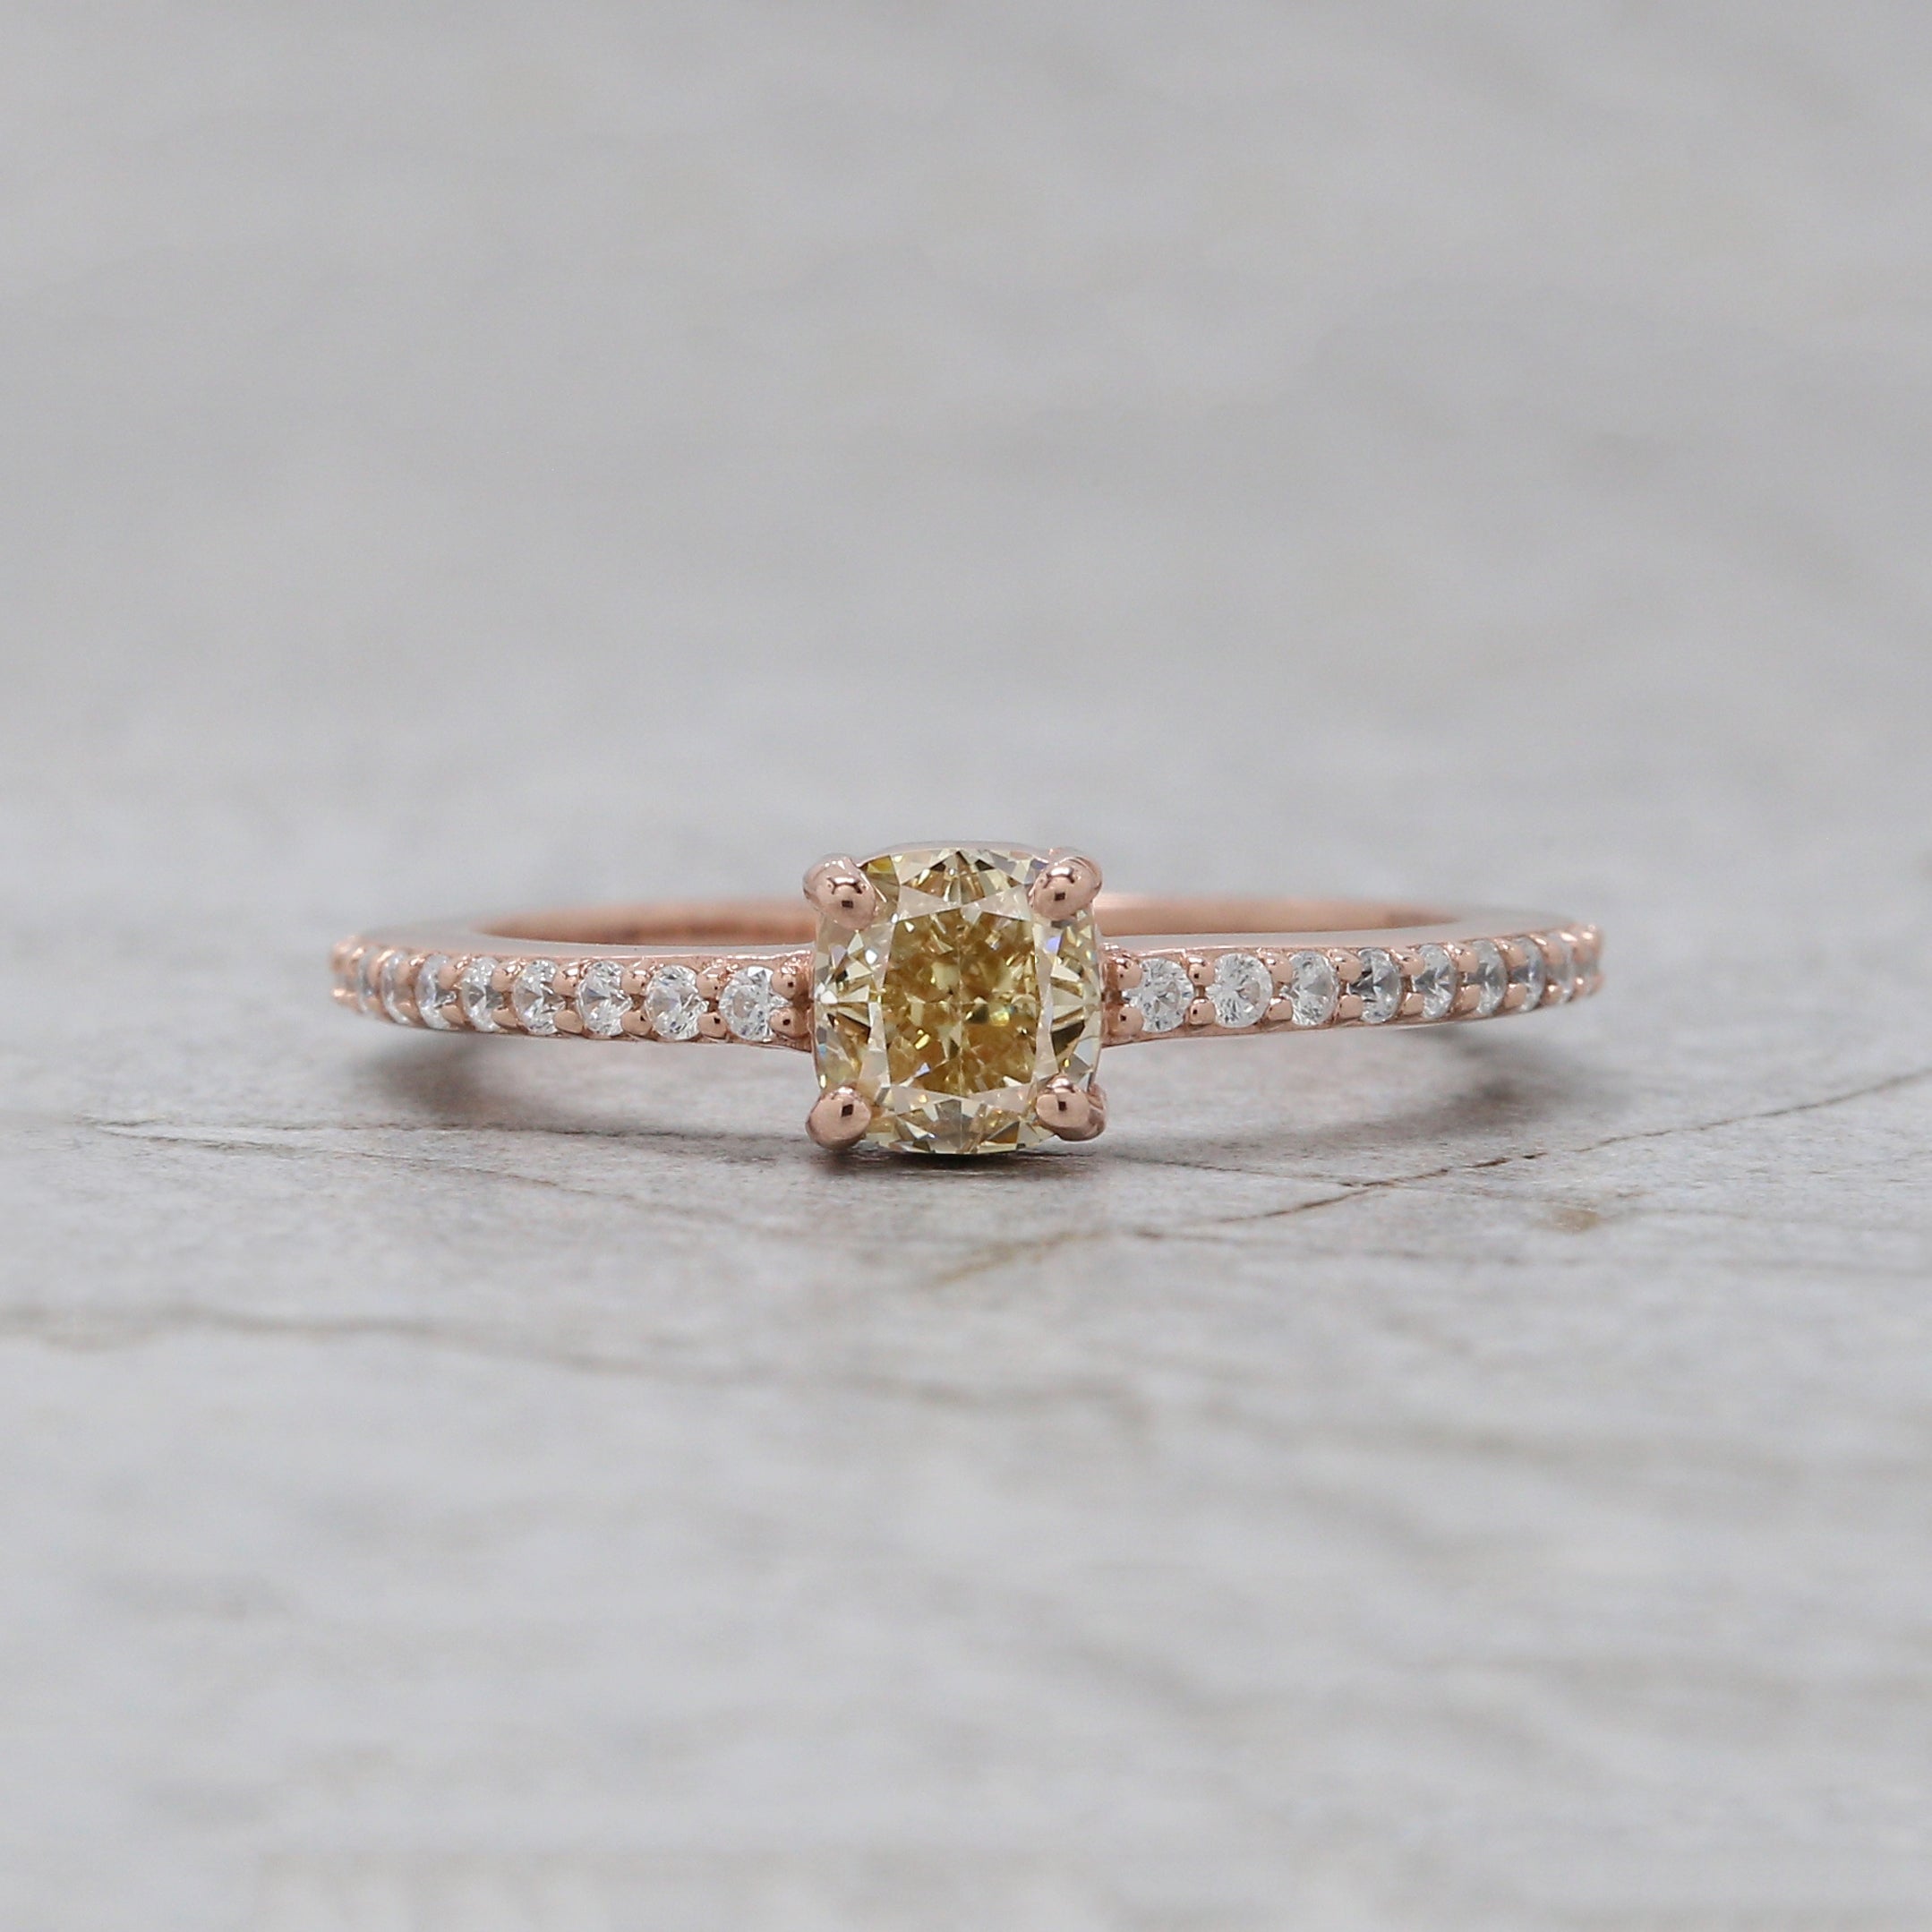 Cushion Yellow Color Diamond Ring 0.71 Ct 4.90 MM Cushion Shape Diamond Ring 14K Solid Rose Gold Silver Engagement Ring Gift For Her QL5778